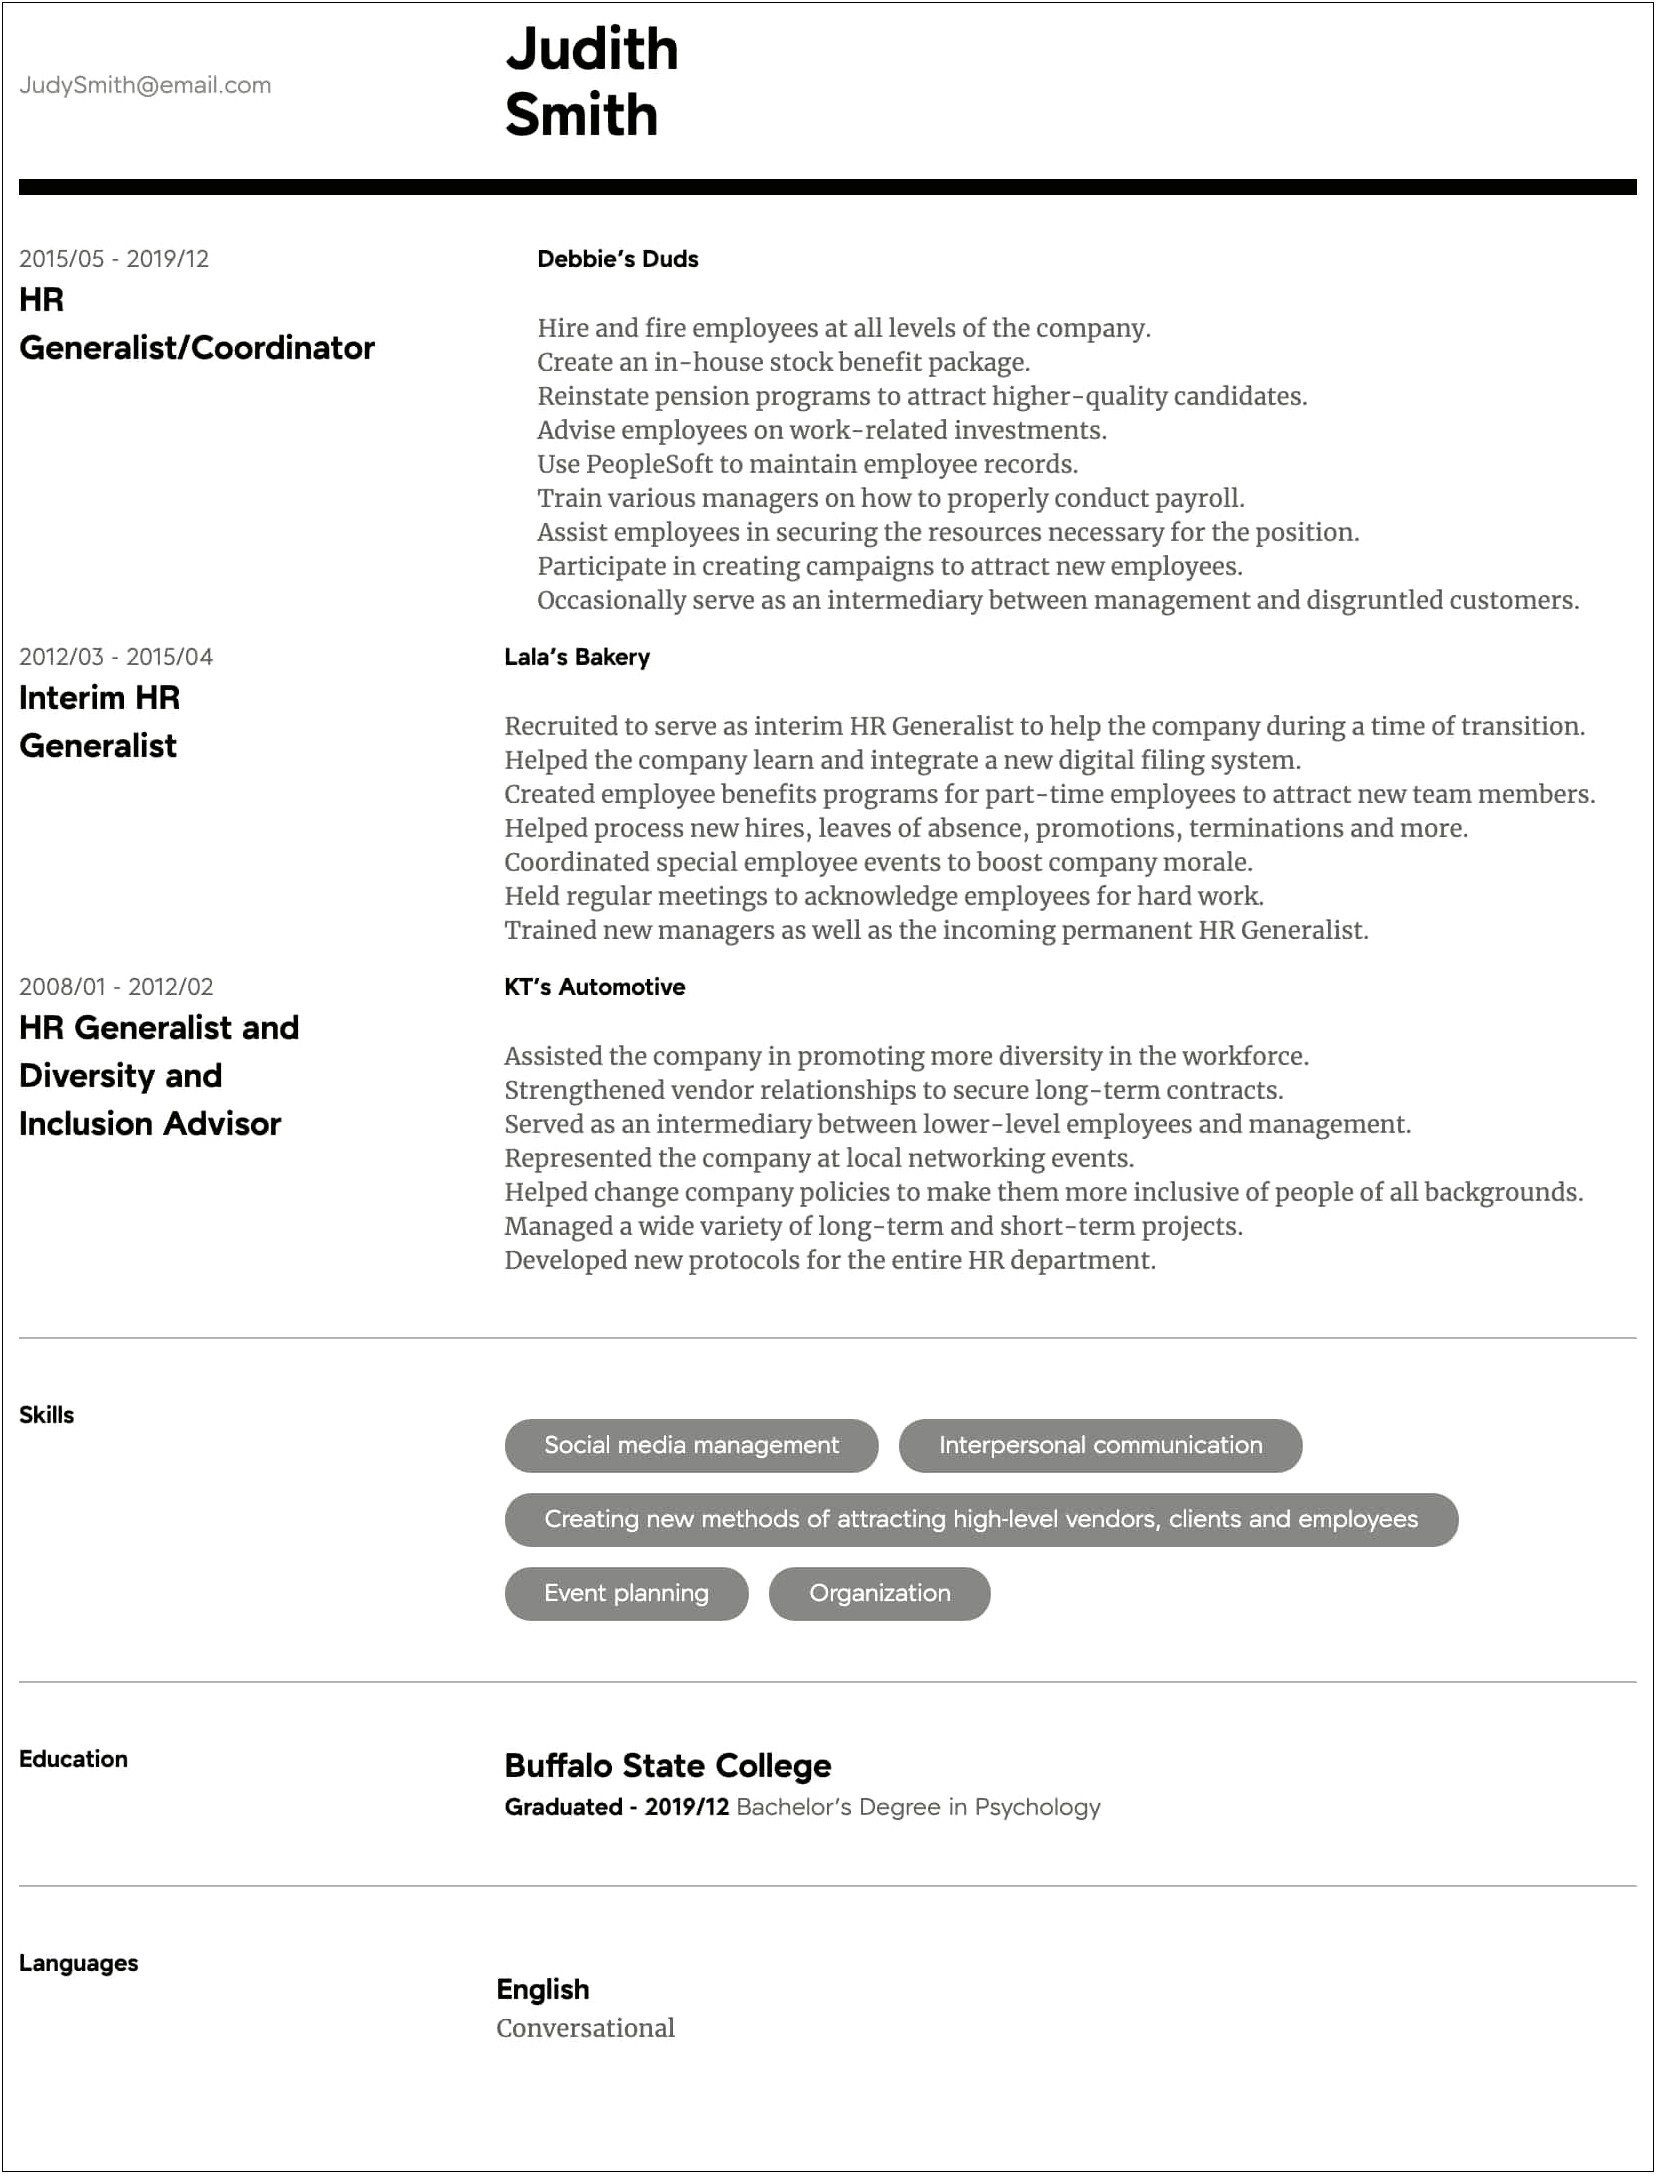 Resume Skill For Hr Professional